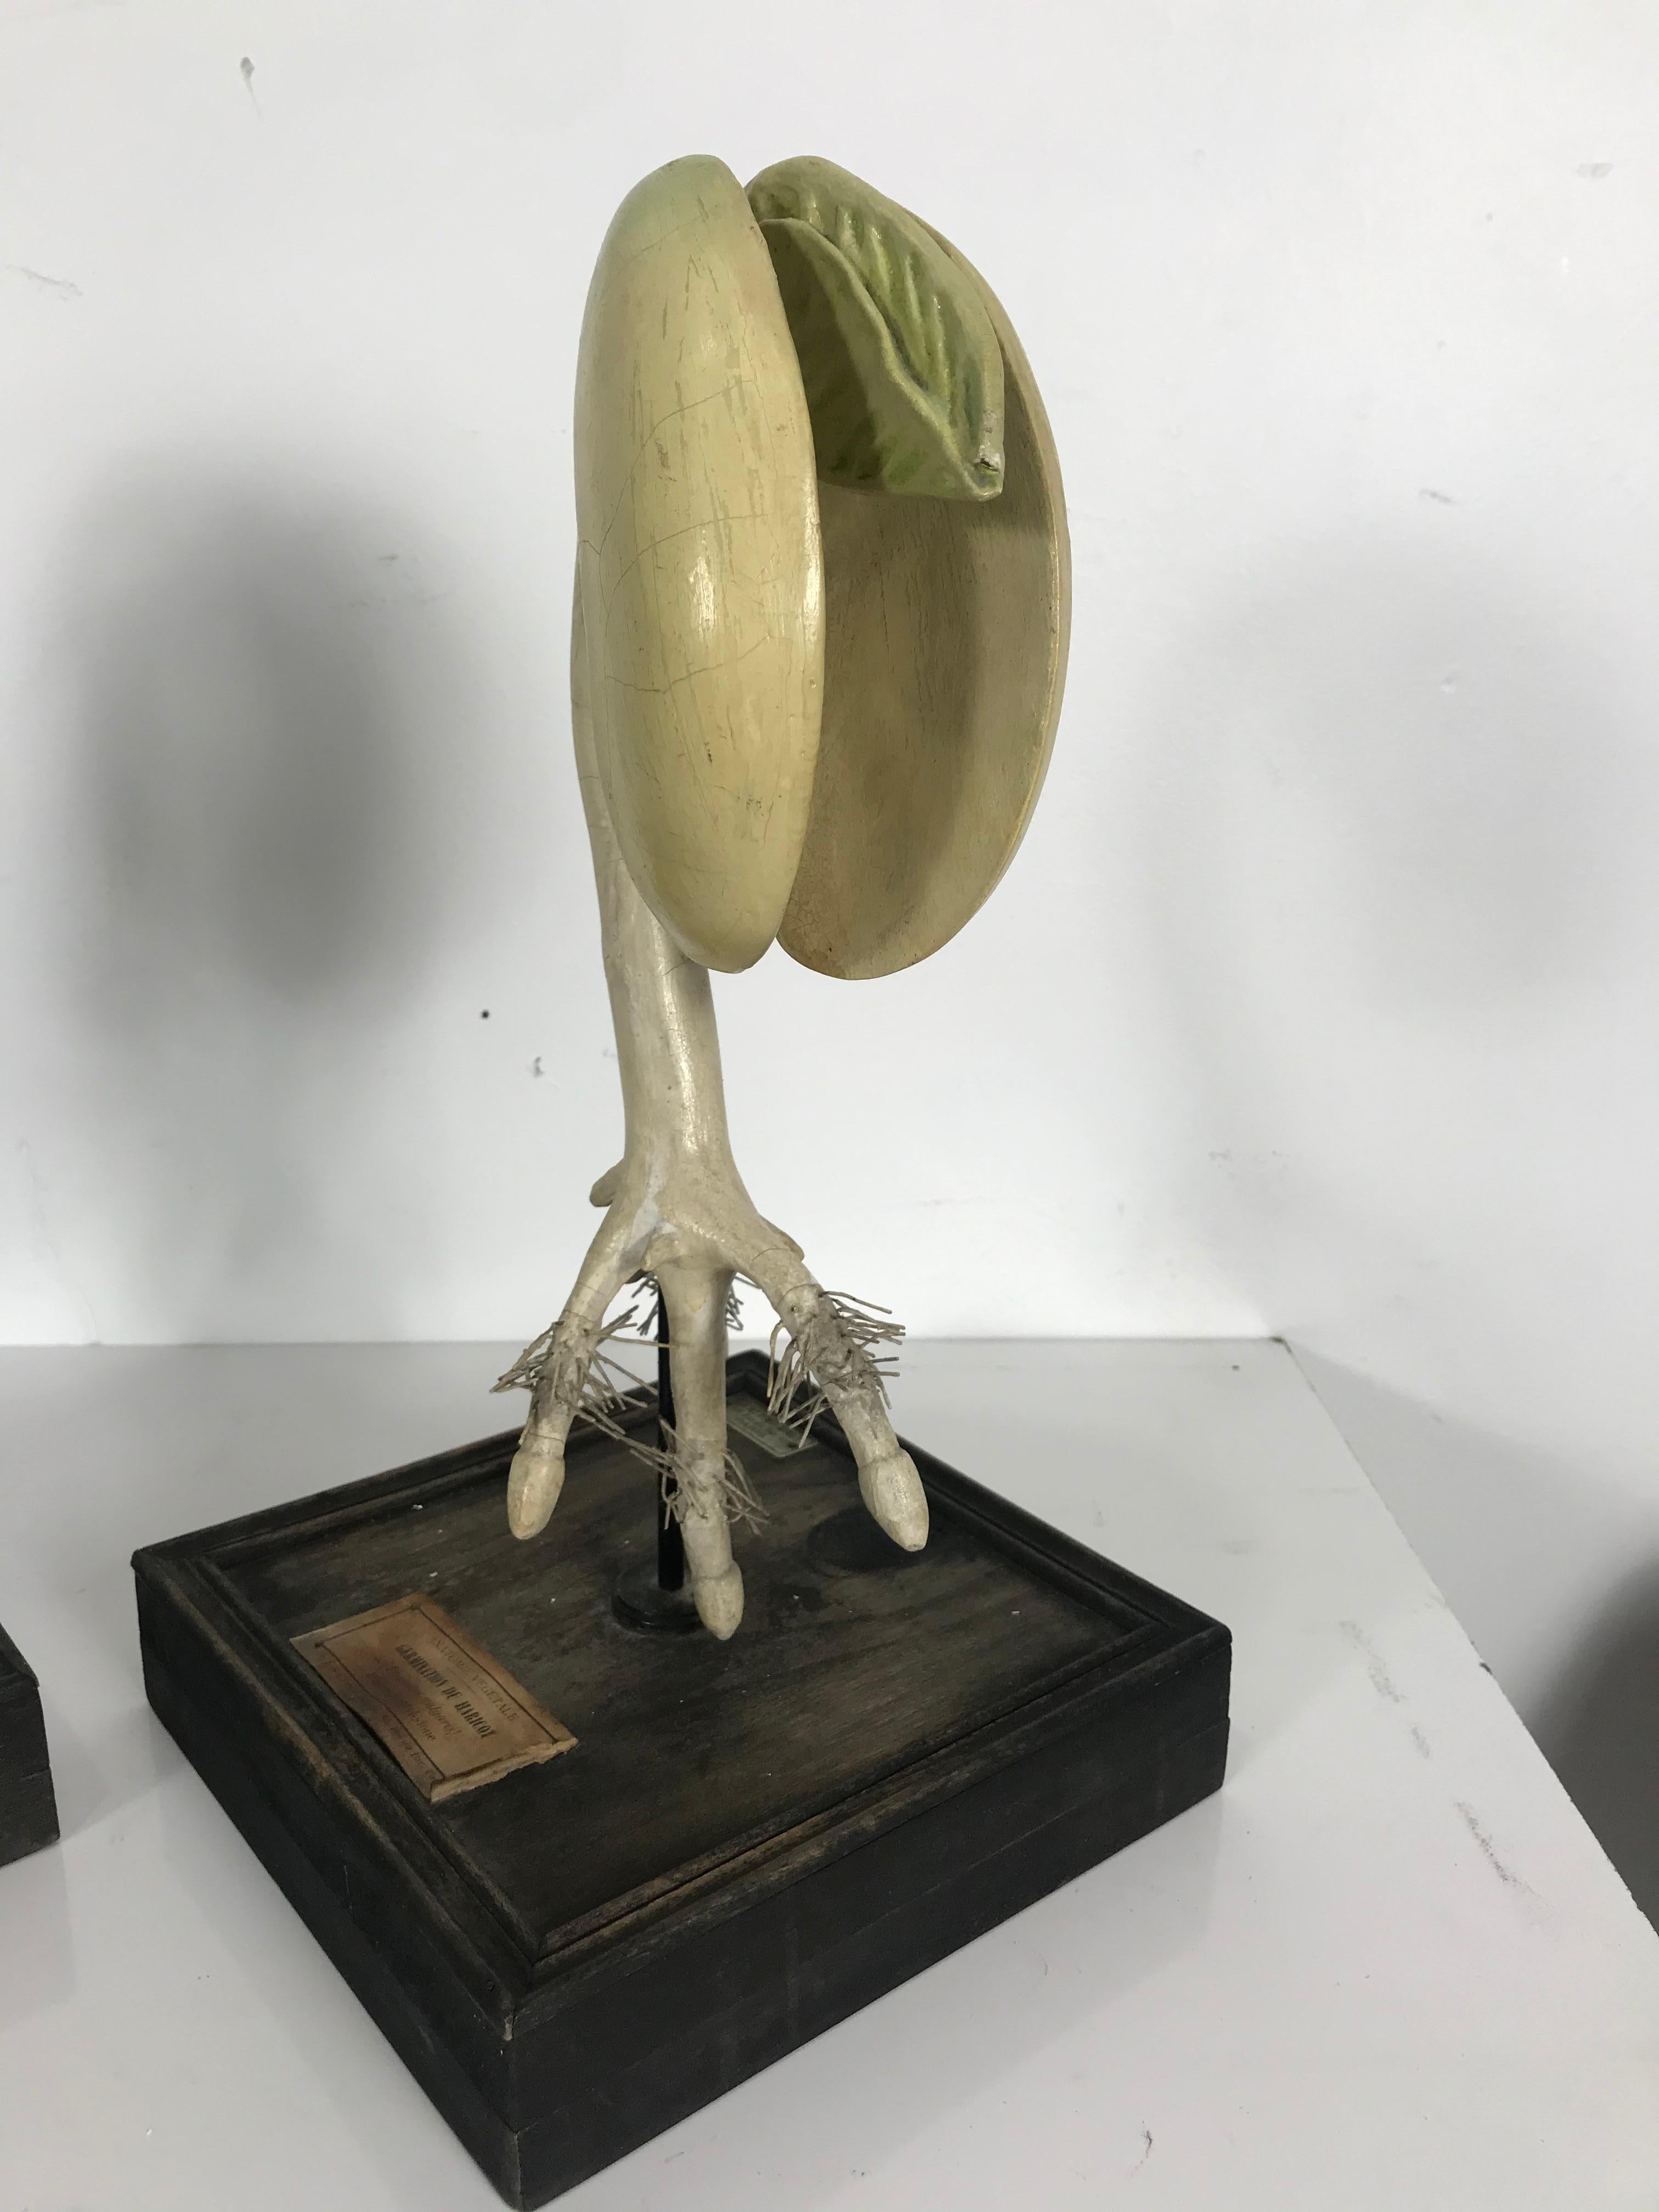 Emile Deyrolle 19th Century Plaster, Wire and Wood Didactic Germination Models In Good Condition For Sale In Buffalo, NY